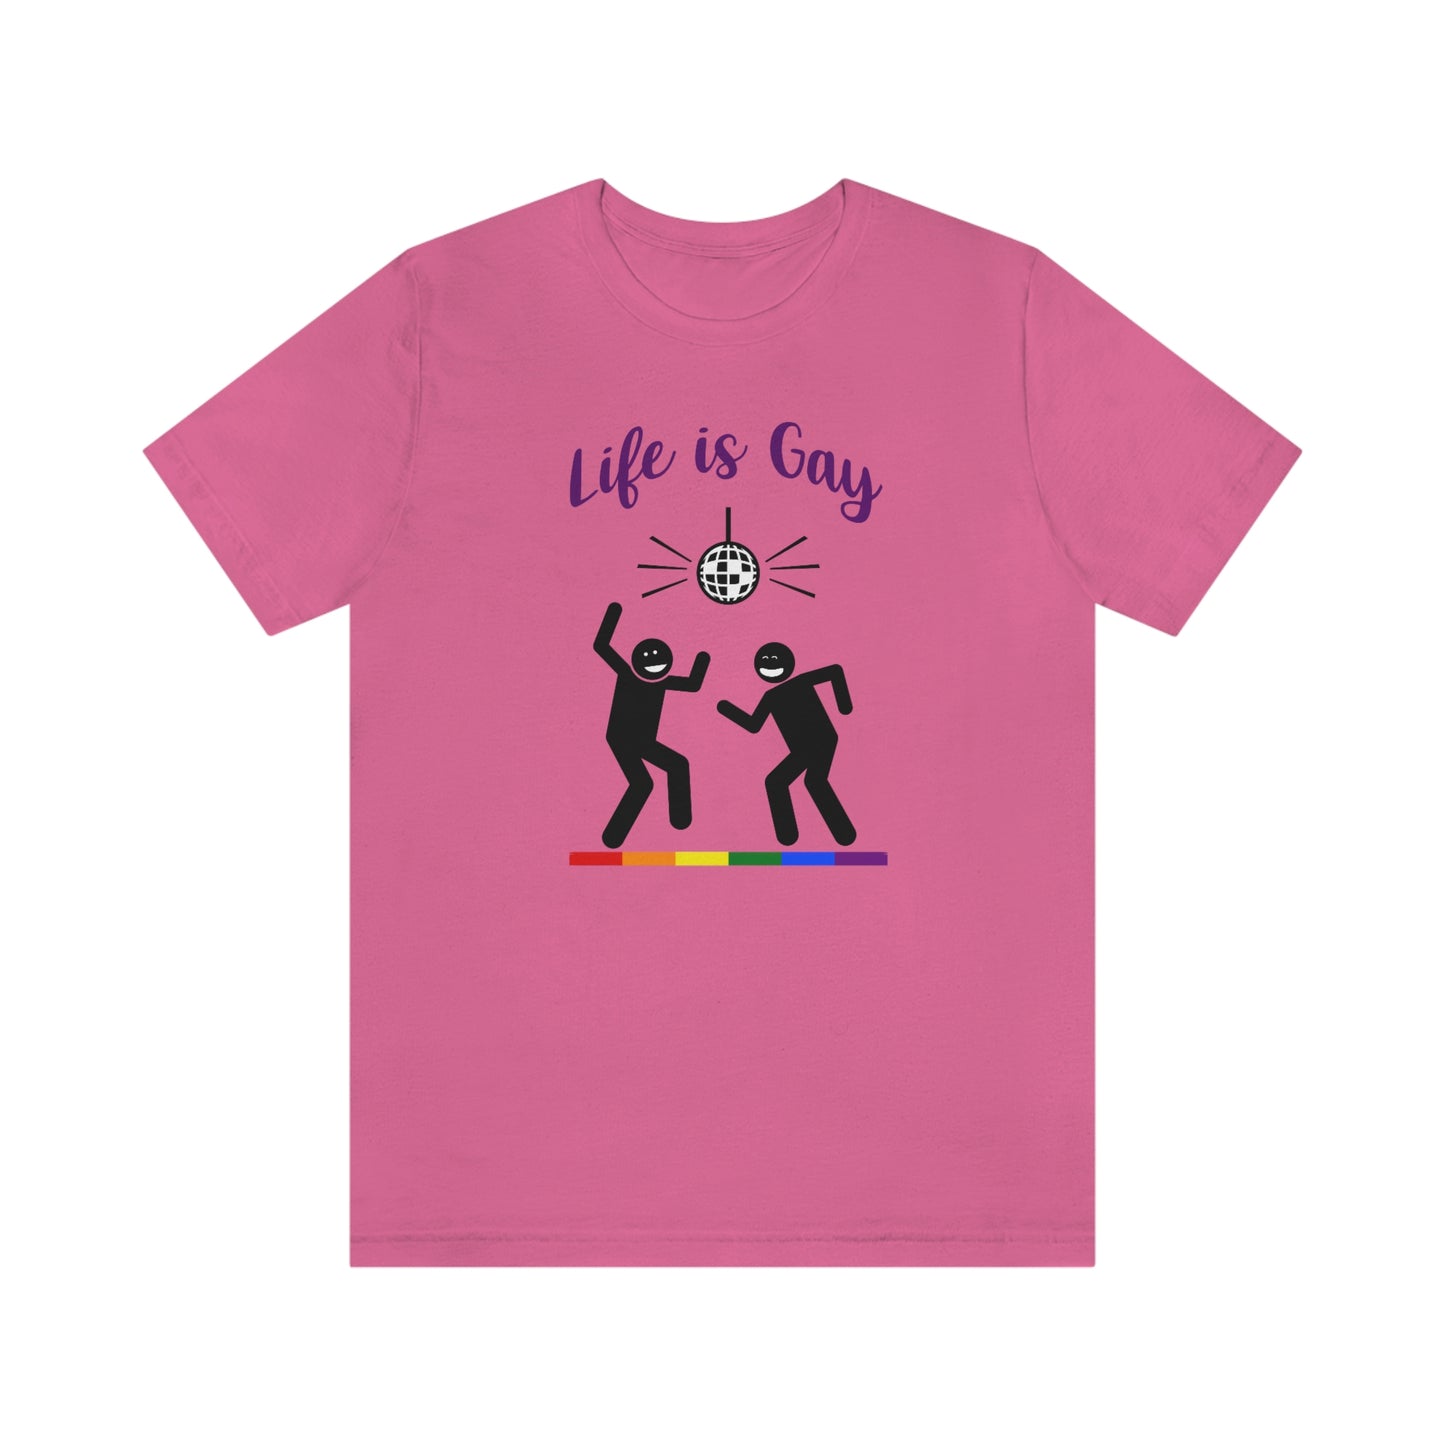 Life is Gay - Disco Adult Unisex T-Shirt